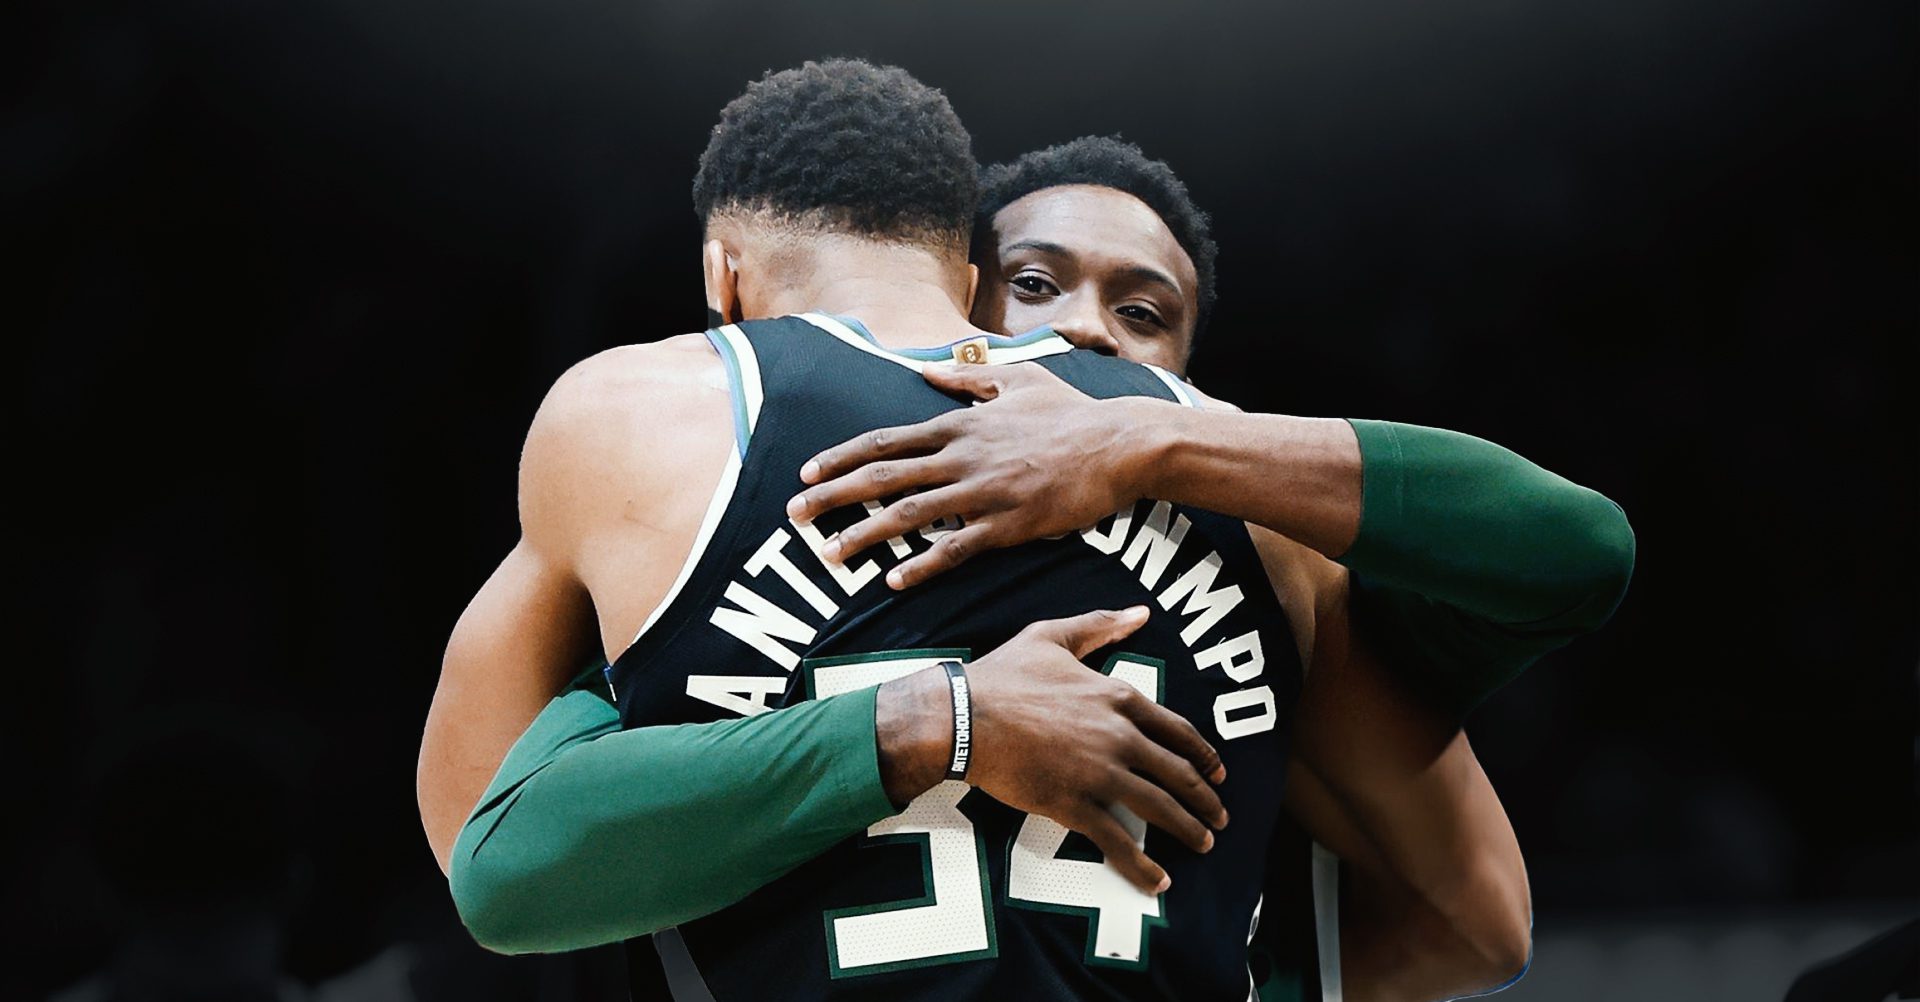 Giannis Can’t Play Or Function Without His Brother Thanasis, According to Former Teammate